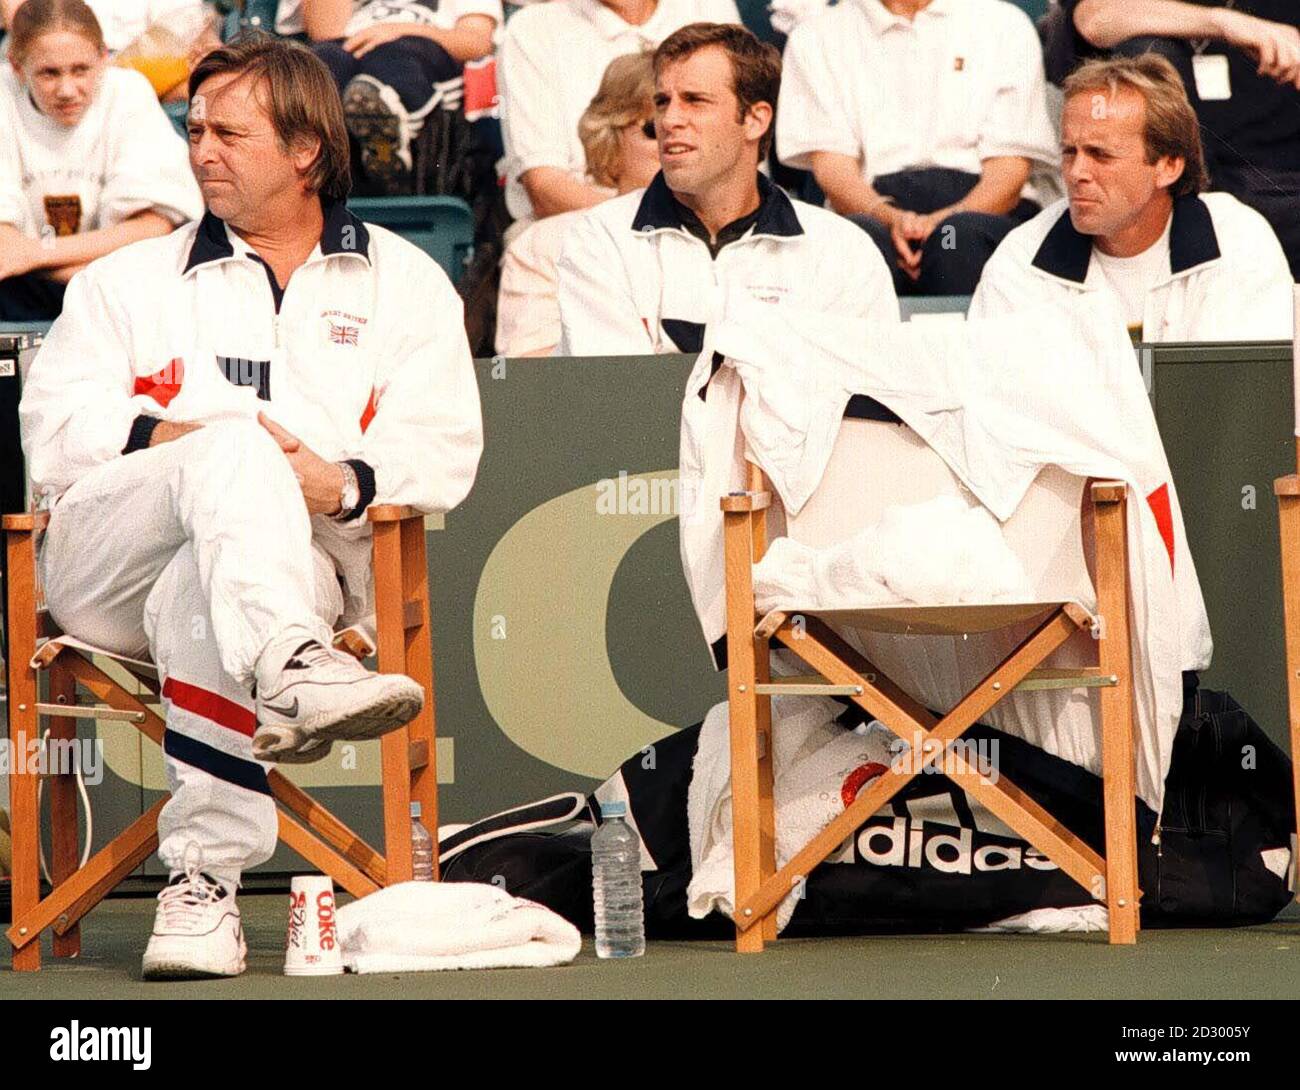 From left: David Lloyd, Greg Rusedski and John Lloyd watch the doubles  Davis Cup match between Great Britain v India at the Nottingham Tennis  Centre today (Sat). PHOTO:RUI VIEIRA/PA Stock Photo -